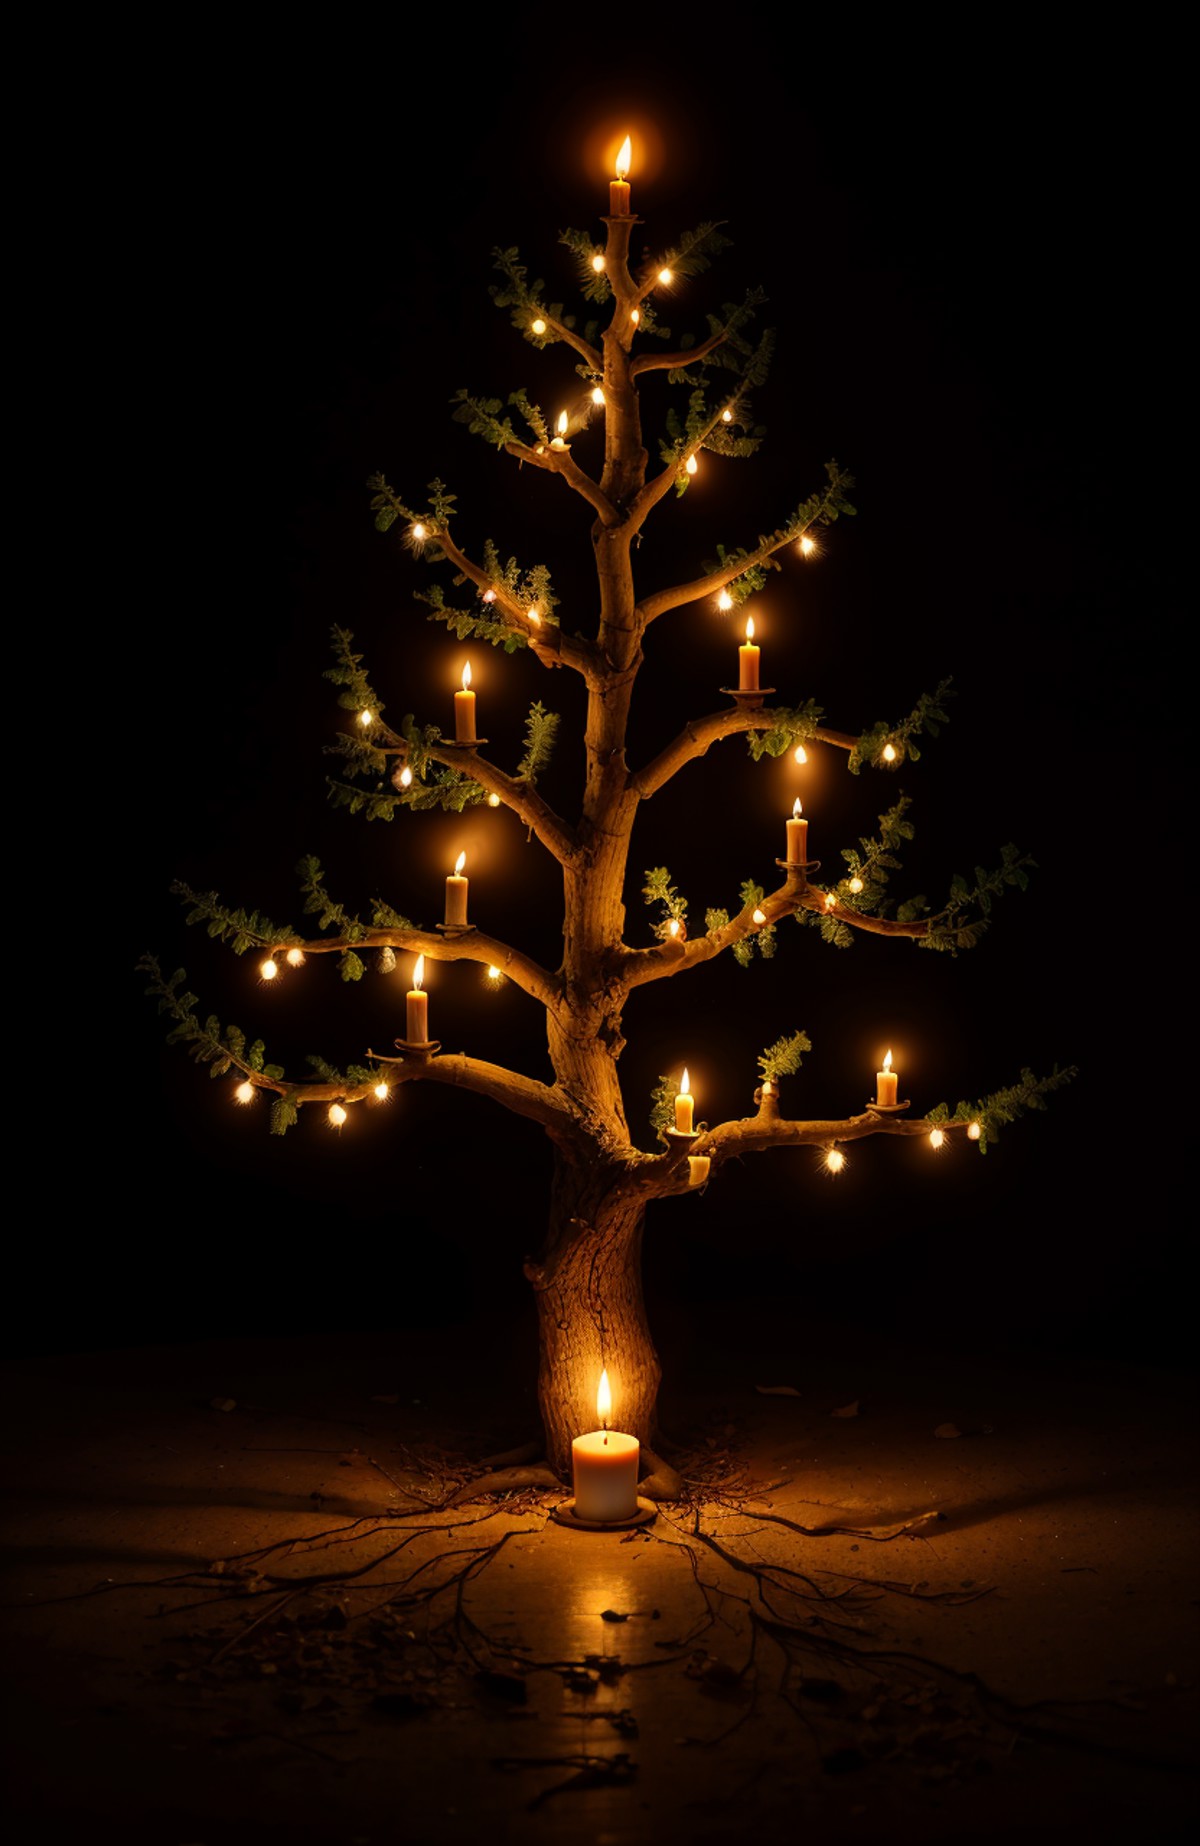 Tree, candles on branches, dark background, quality